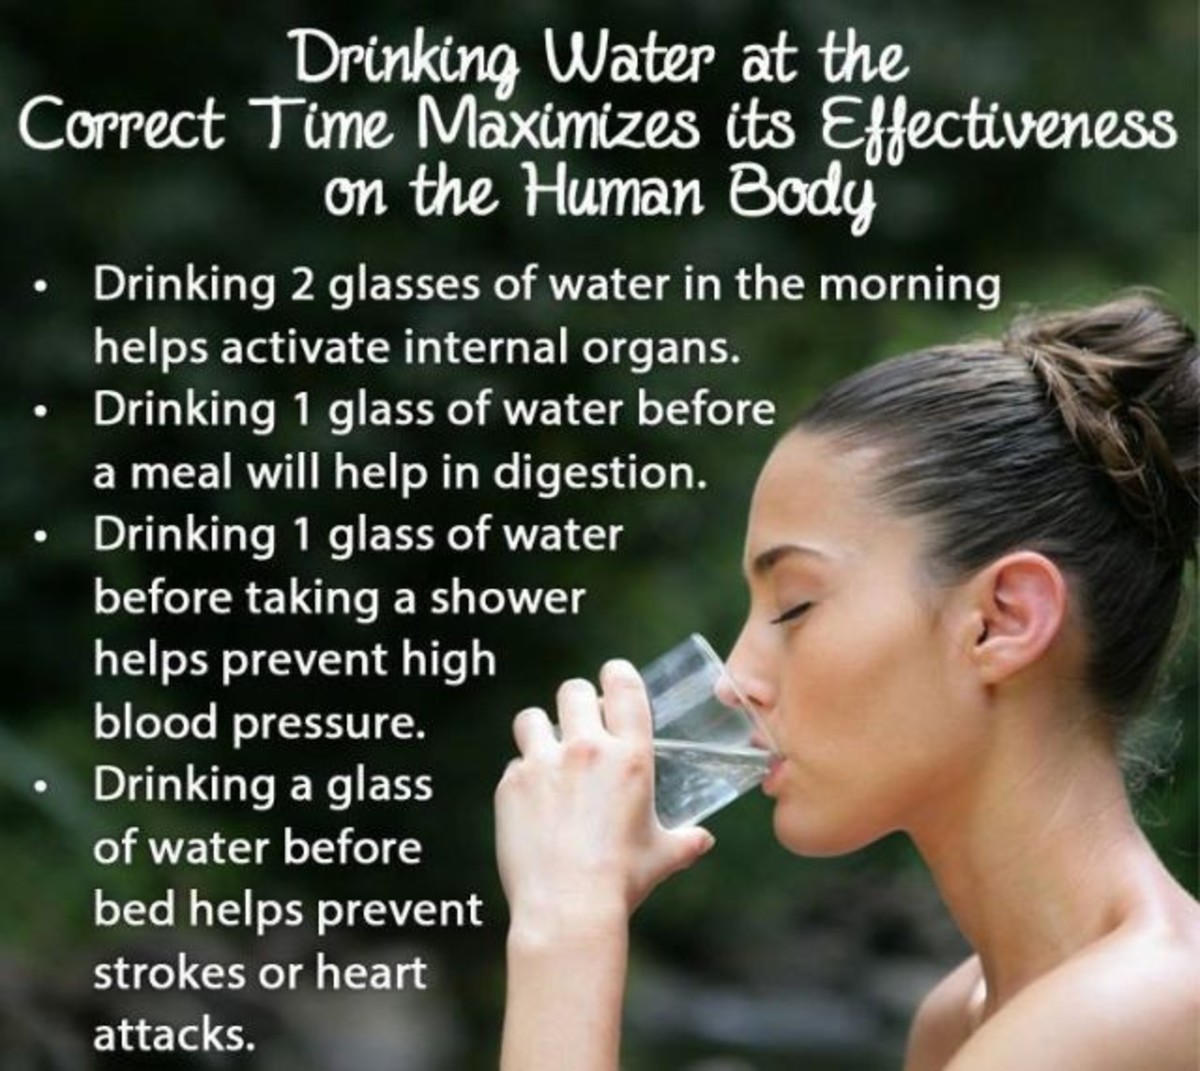 water-therapy-a-better-way-to-regulate-water-intake